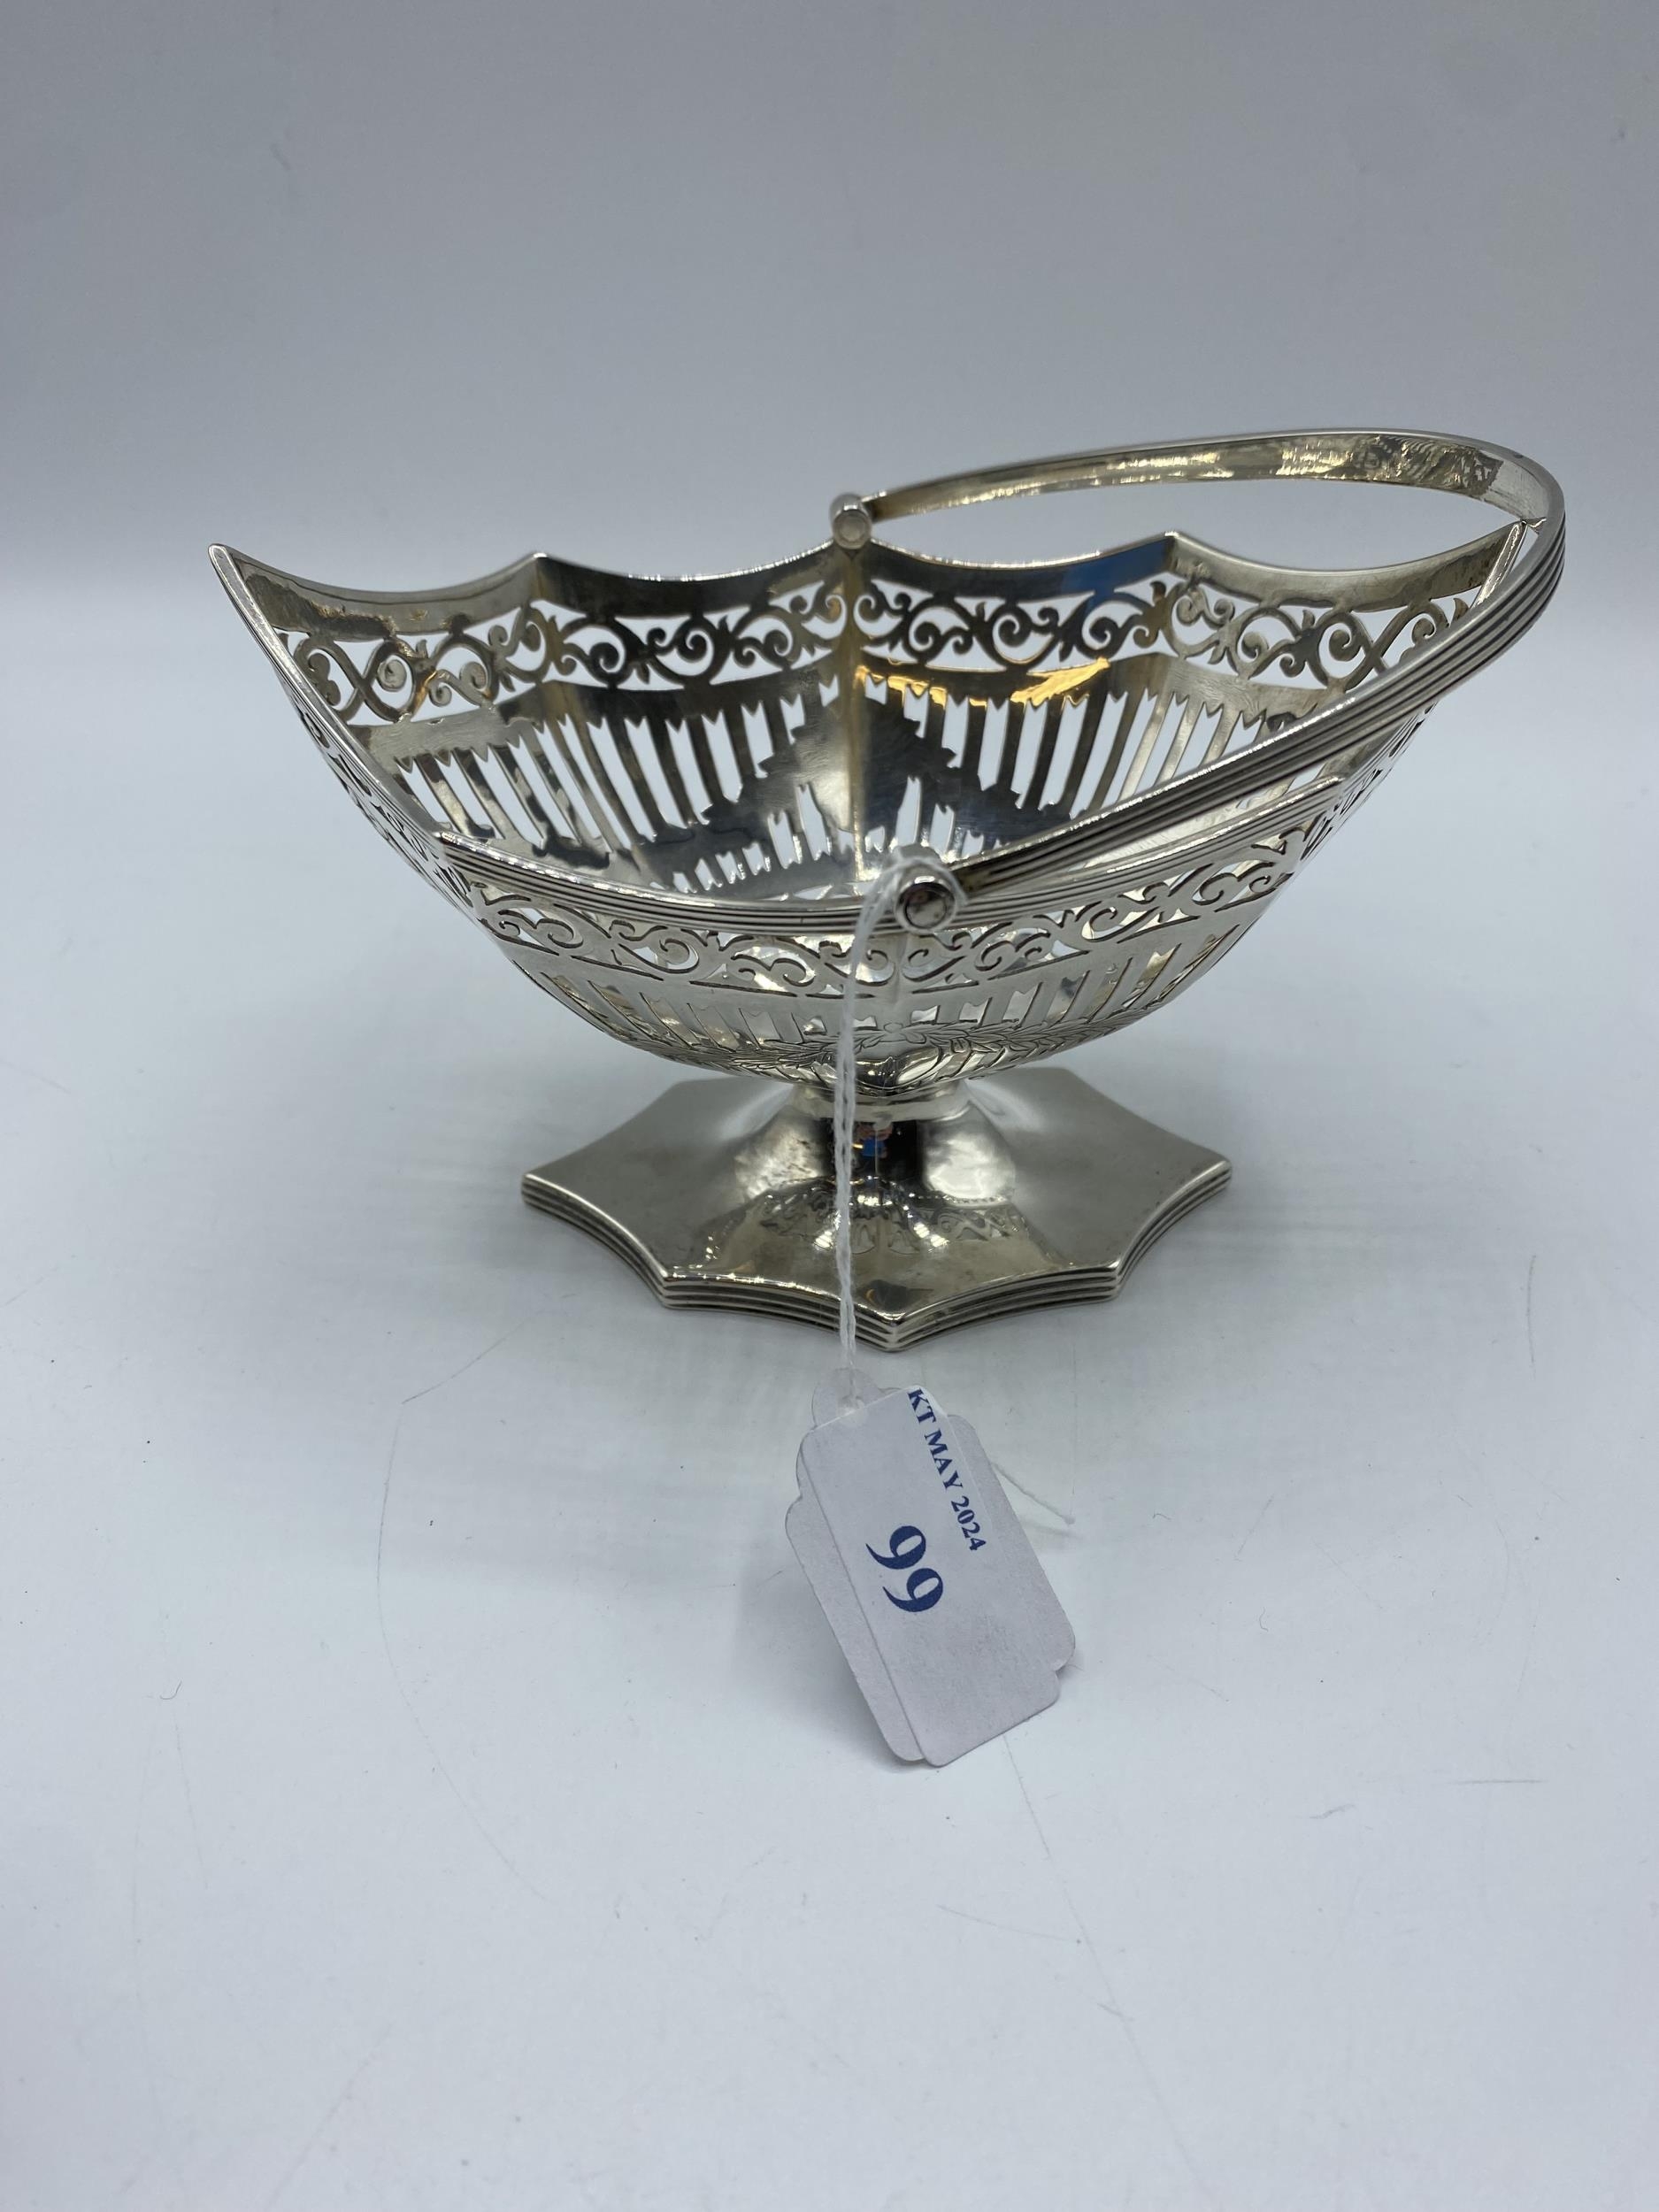 A sterling silver octagonal pierced Bonbon dish with swing handle, by Haseler and Bill, London - Image 4 of 4